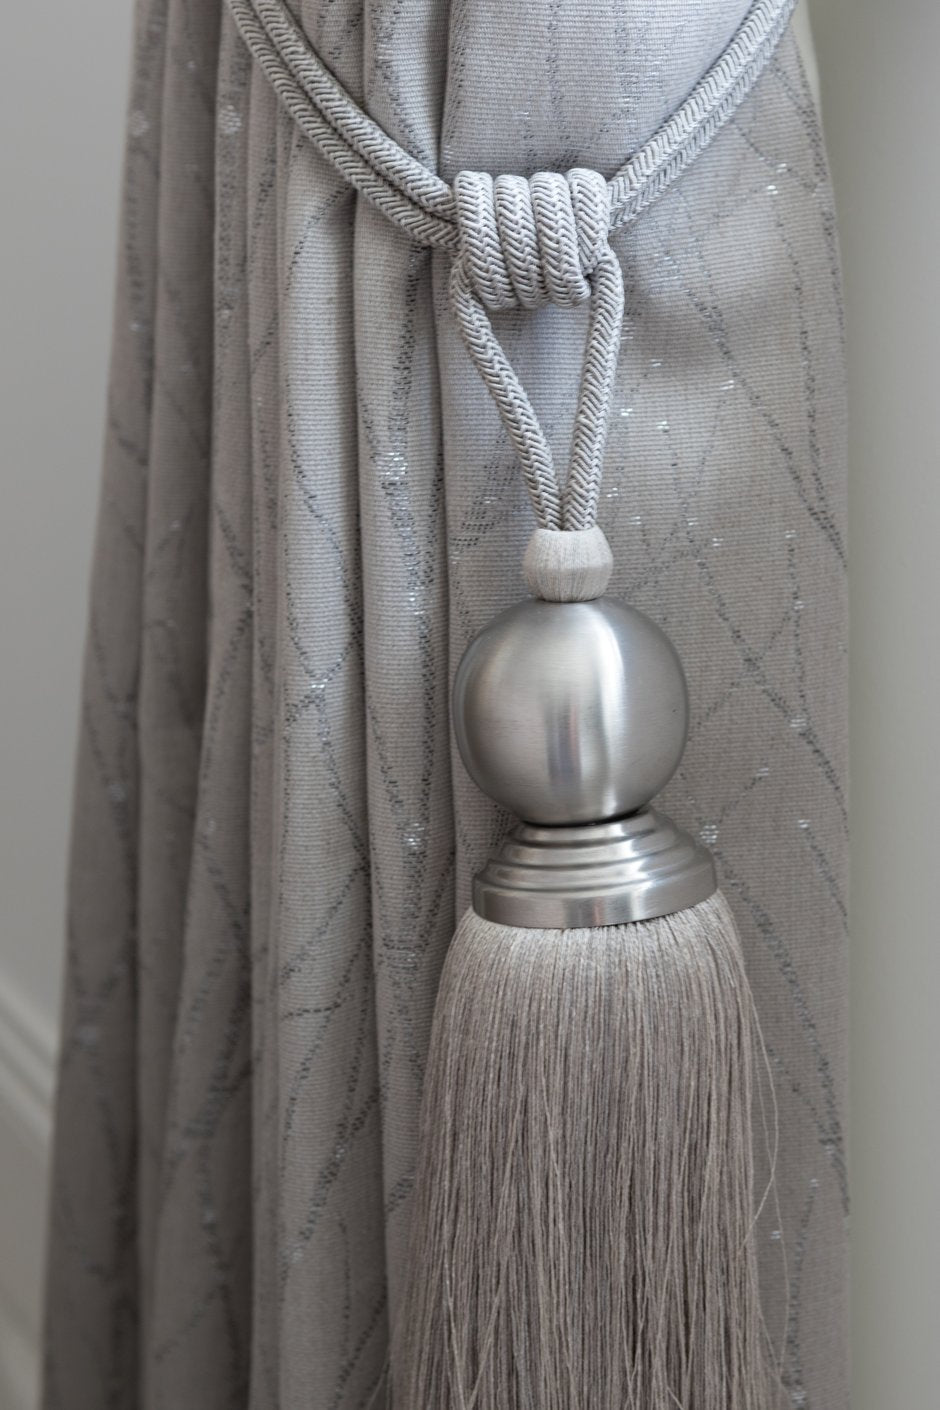 http://www.emblem-interiors.com/collections/curtains/products/curtains-1